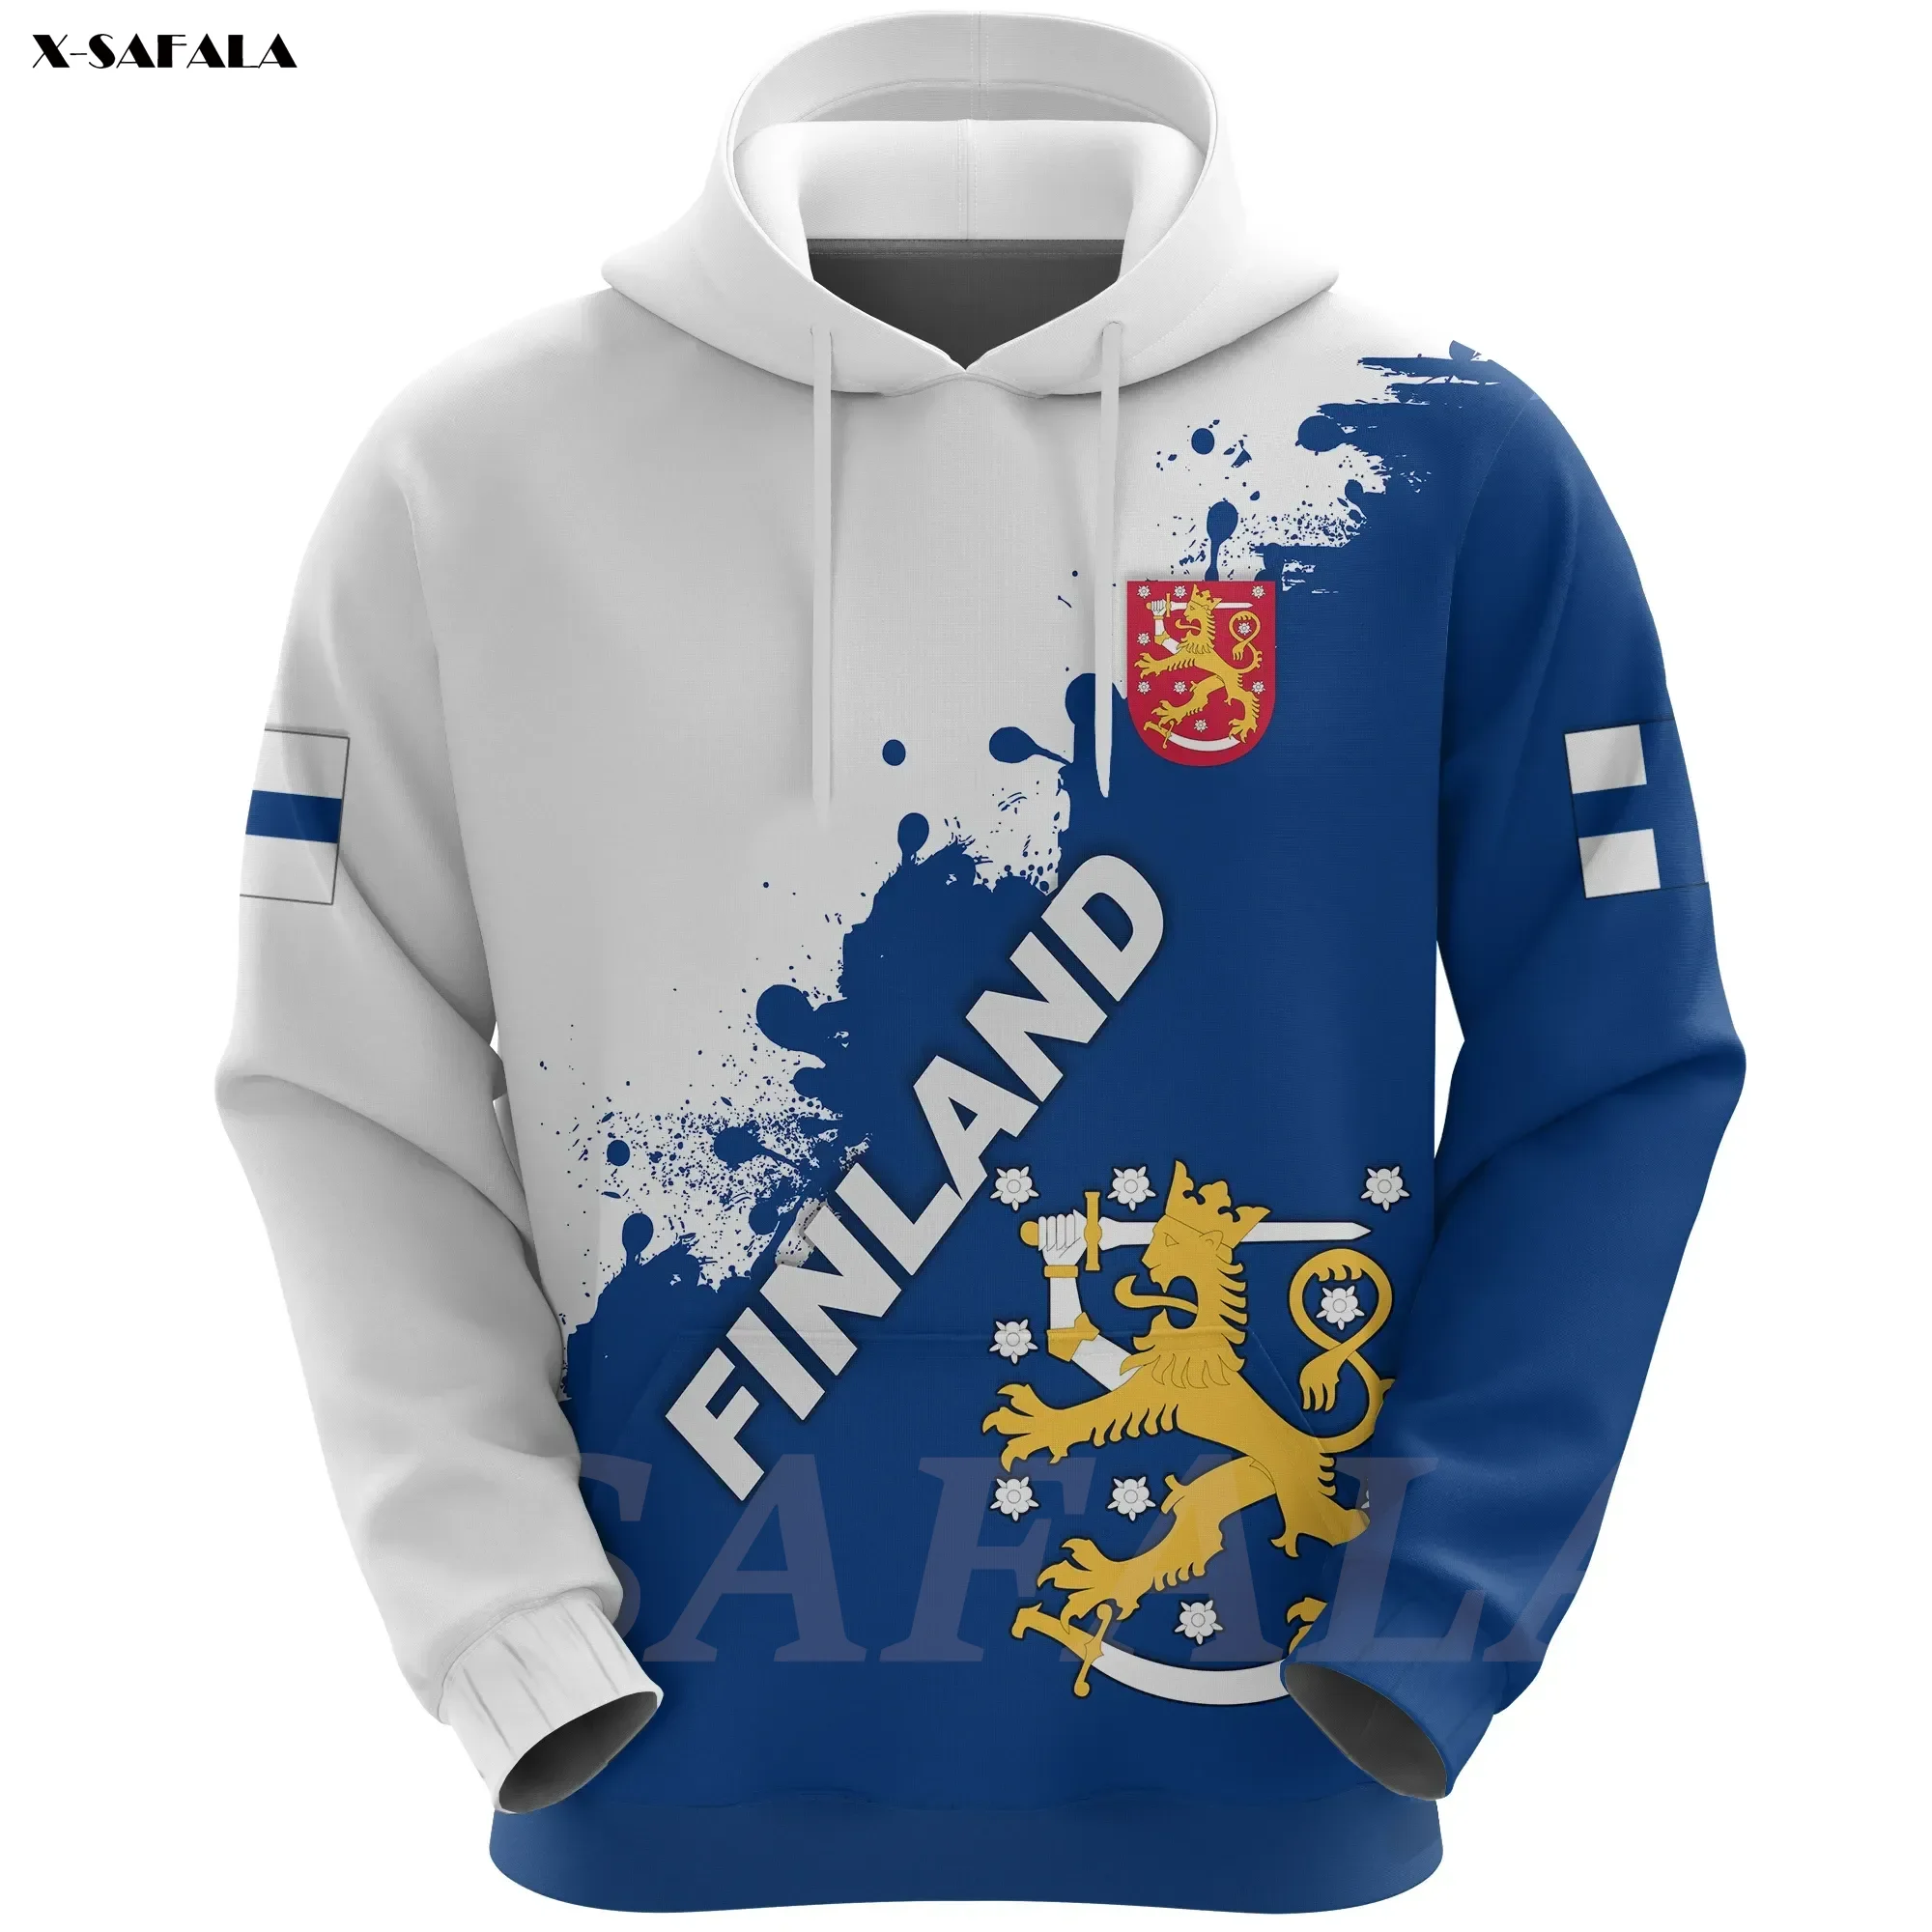 Finland Skull Tattoo Lion Flag Emble 3D Printed Hoodie Man Outwear Zipper Pullover Sweatshirt Casual Jersey Tops Tracksuits